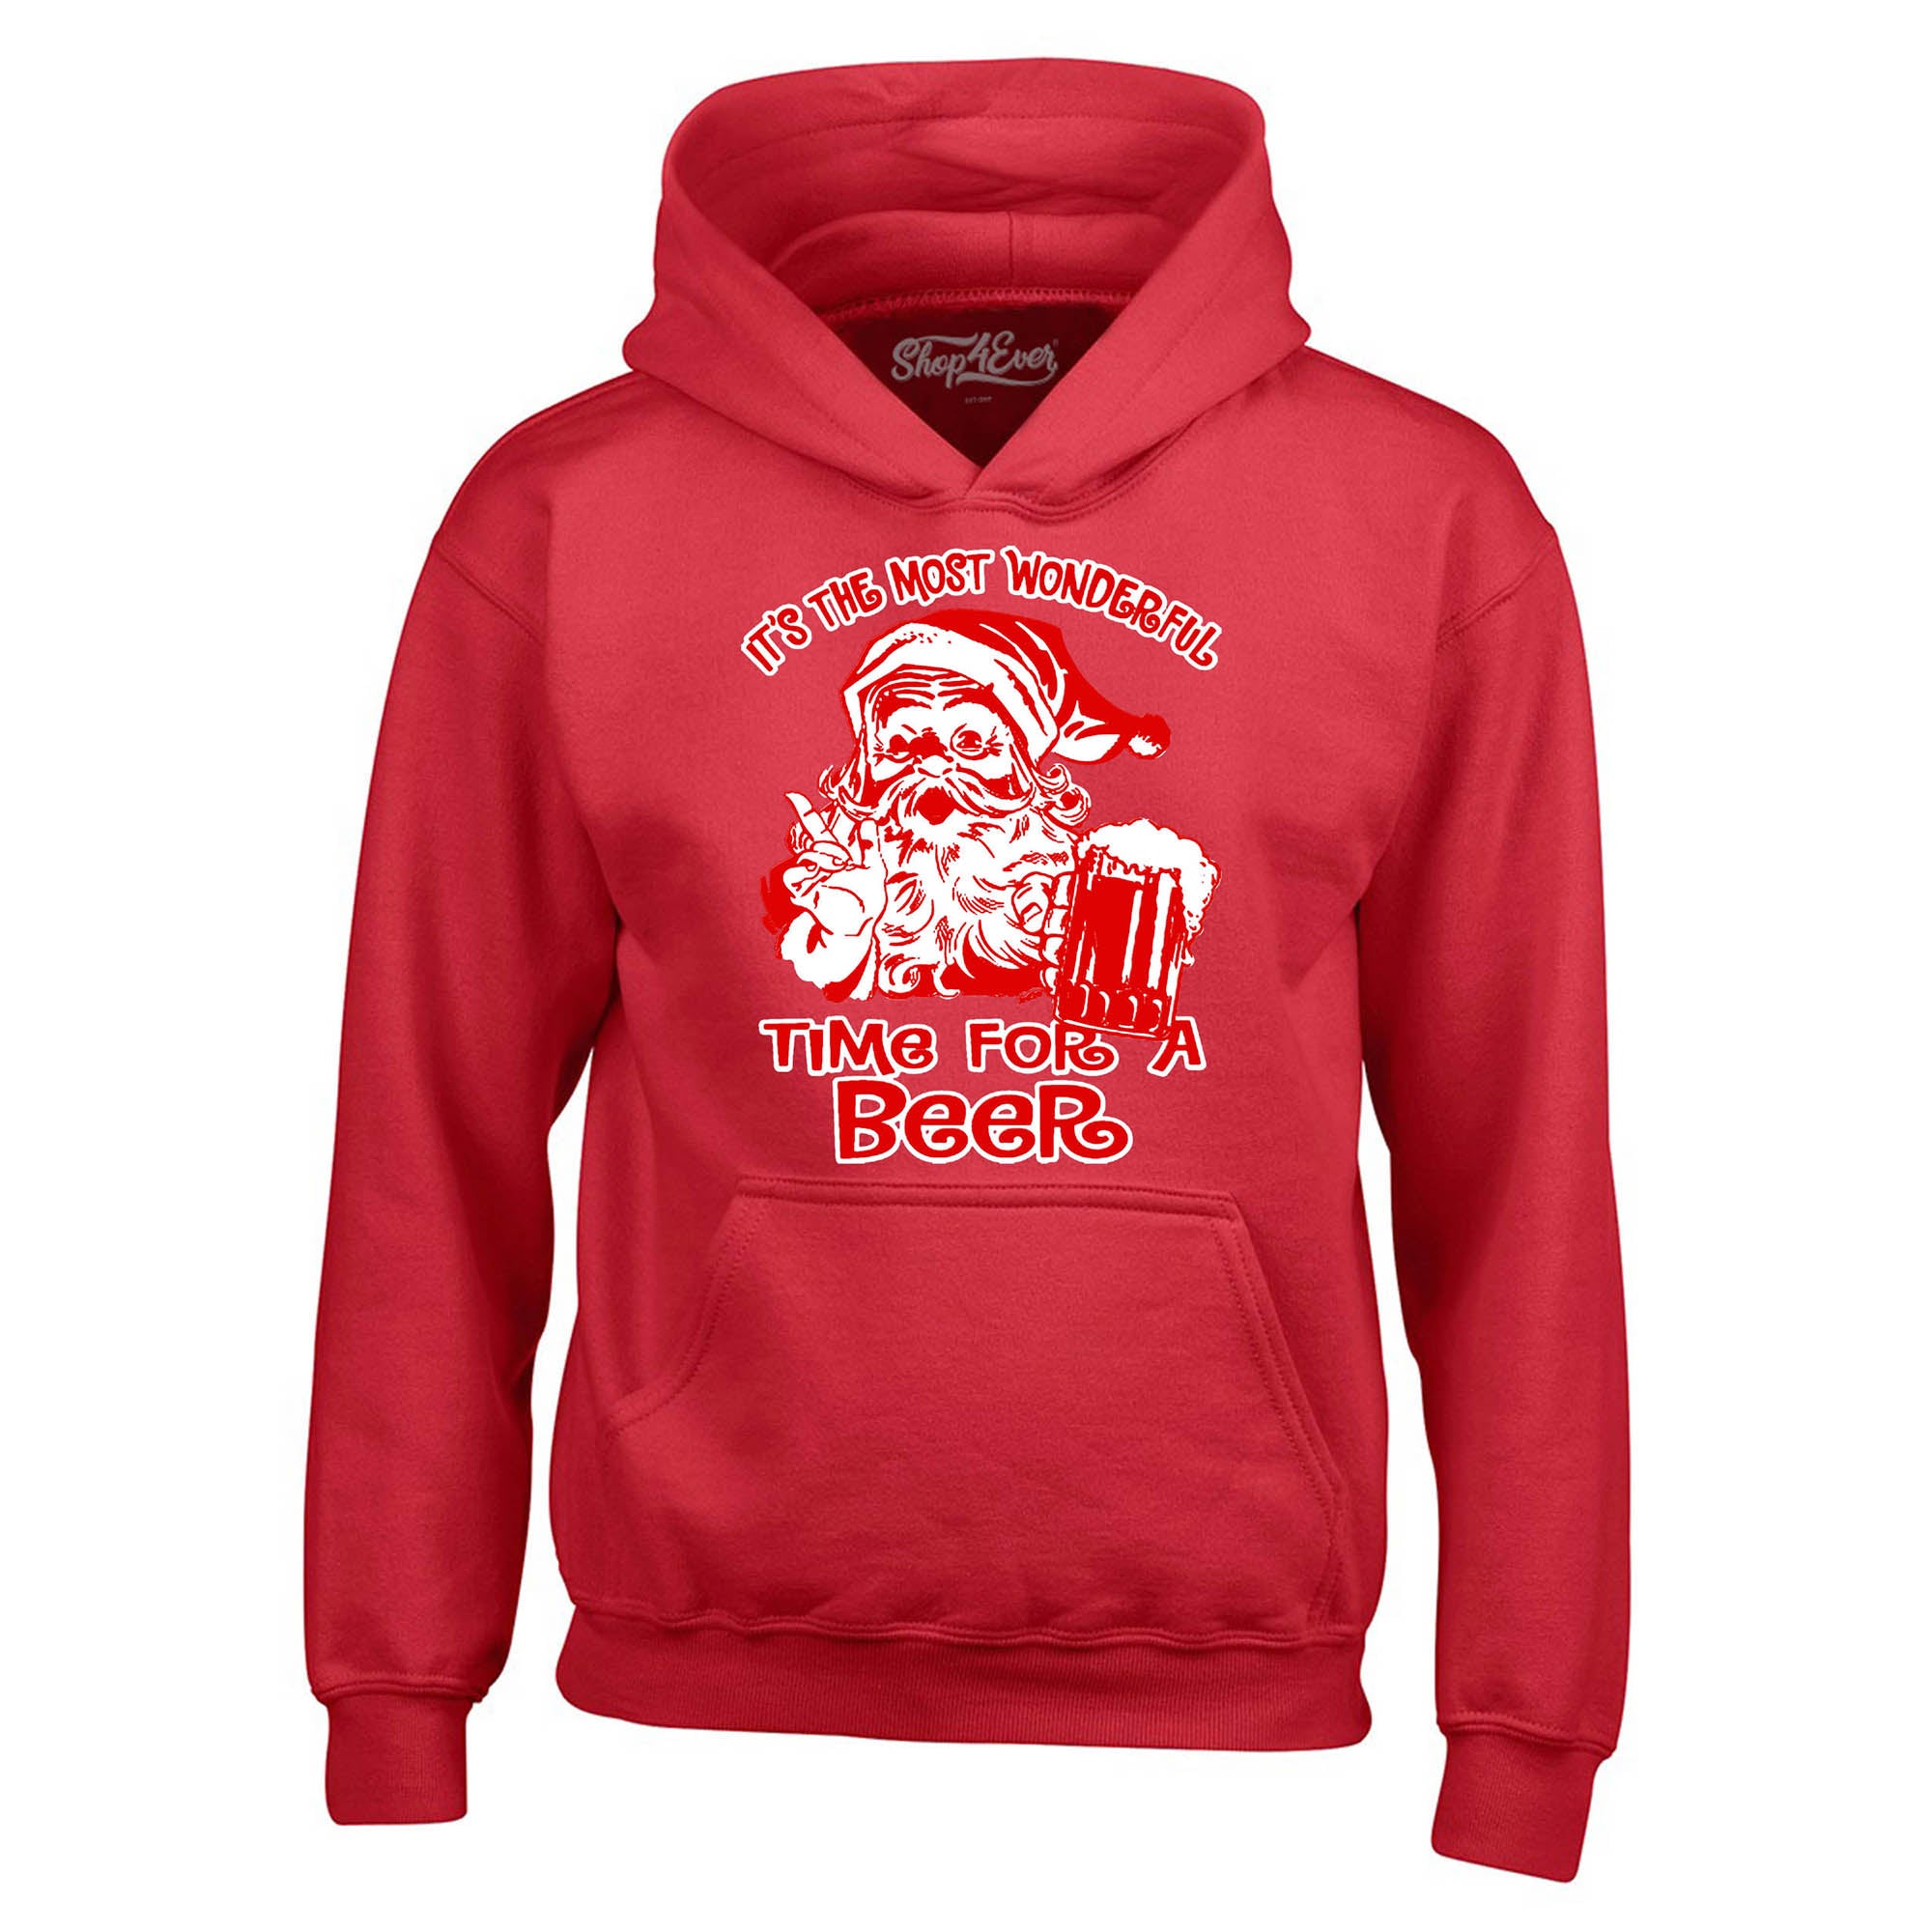 It's The Most Wonderful Time foIt's The Most Wonderful Time for a Beer Hoodies Christmas Sweatshirtsr a Beer Hoodies Christmas Sweatshirts